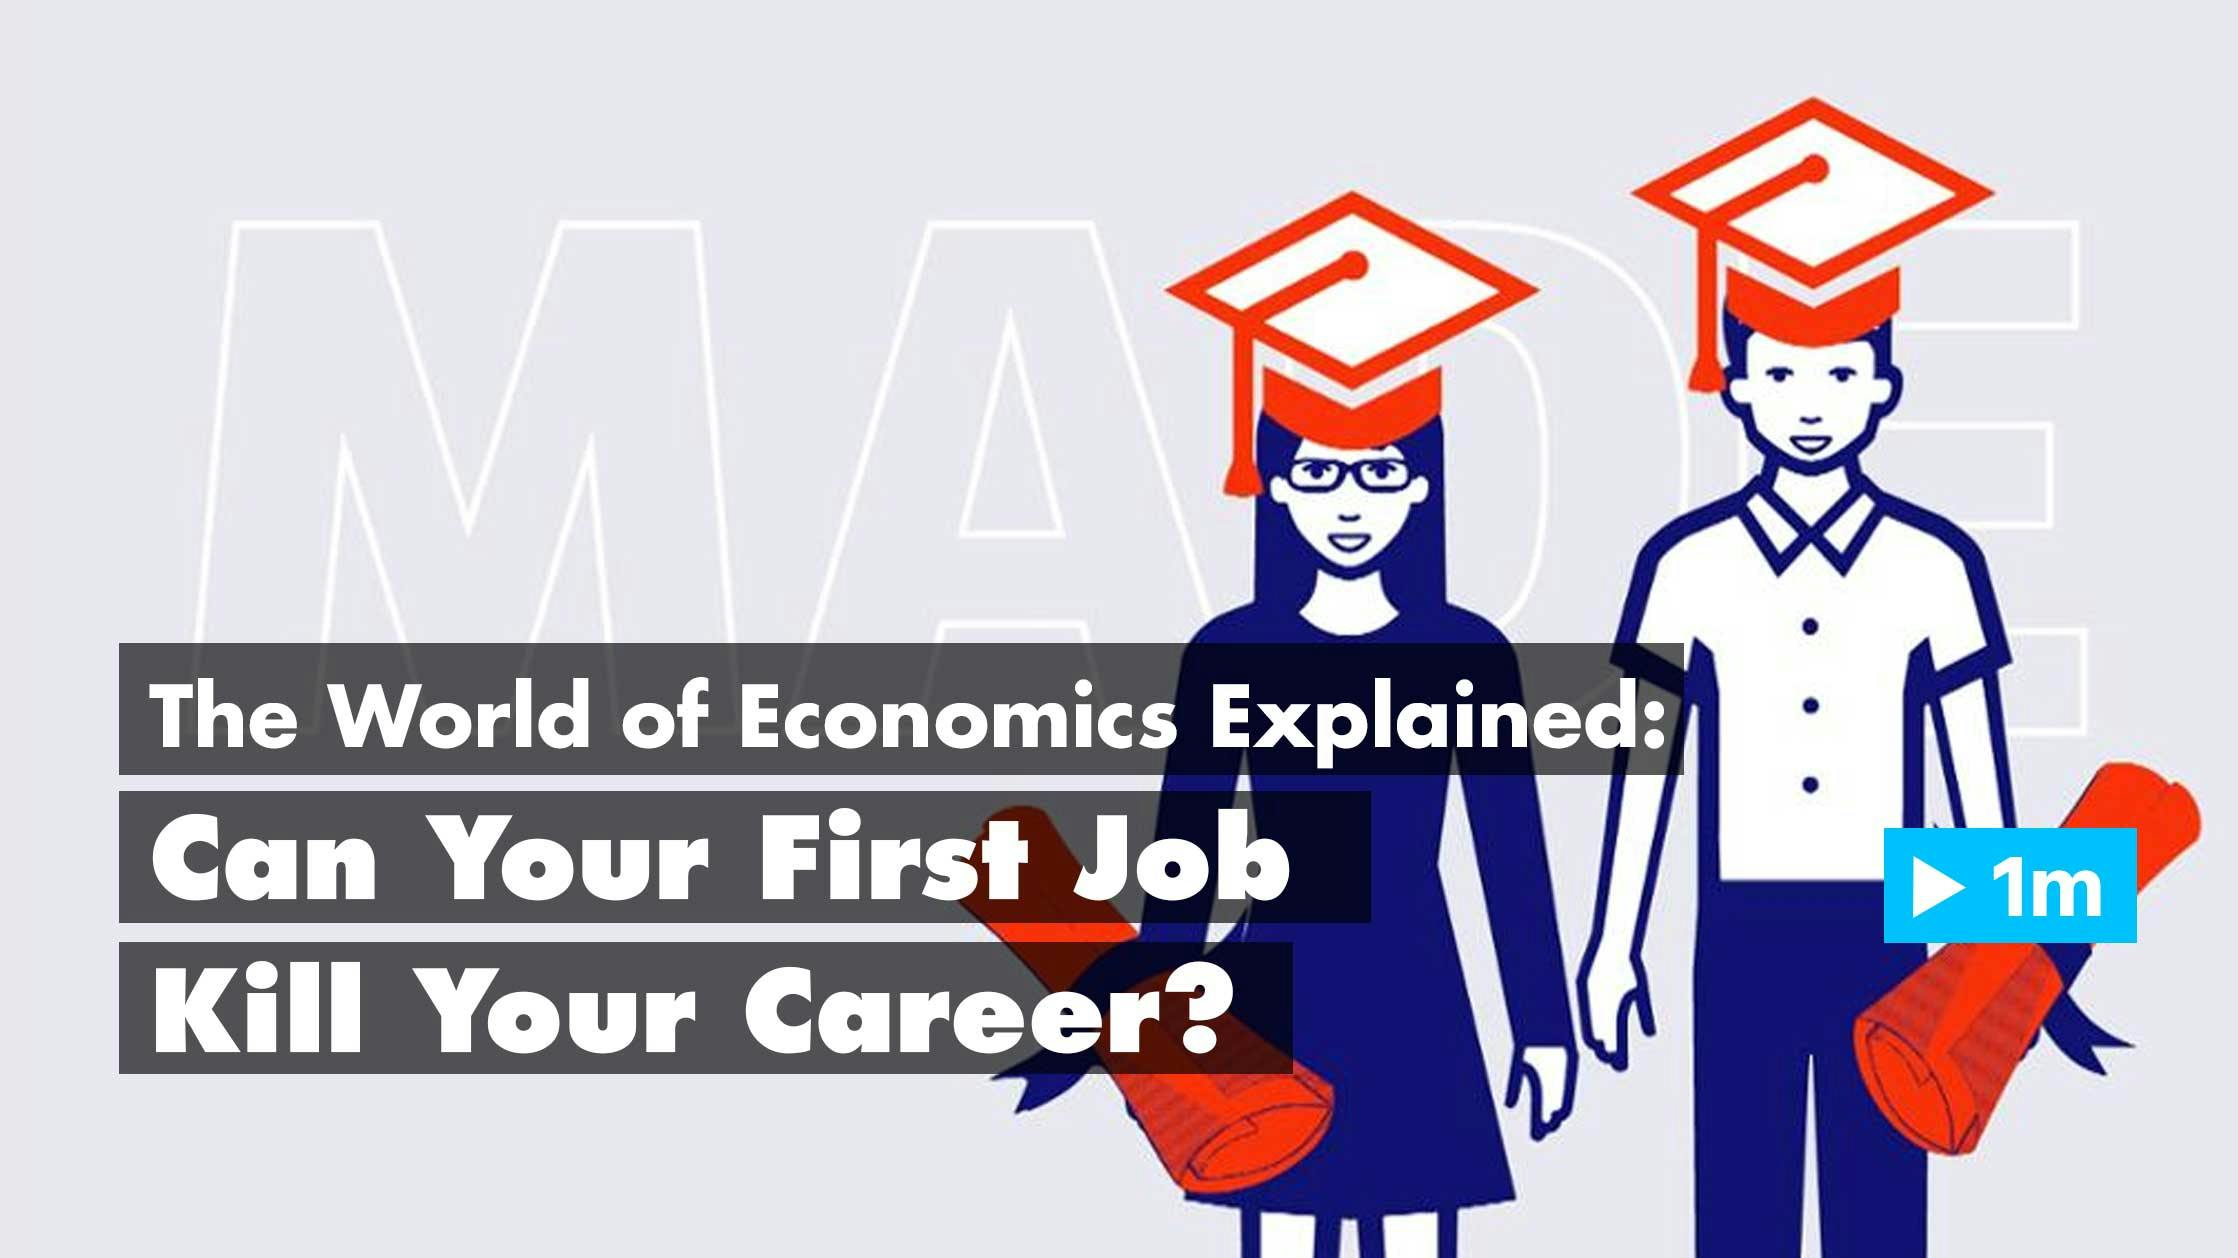 The World of Economics Explained: Can Your First Job Kill Your Career?